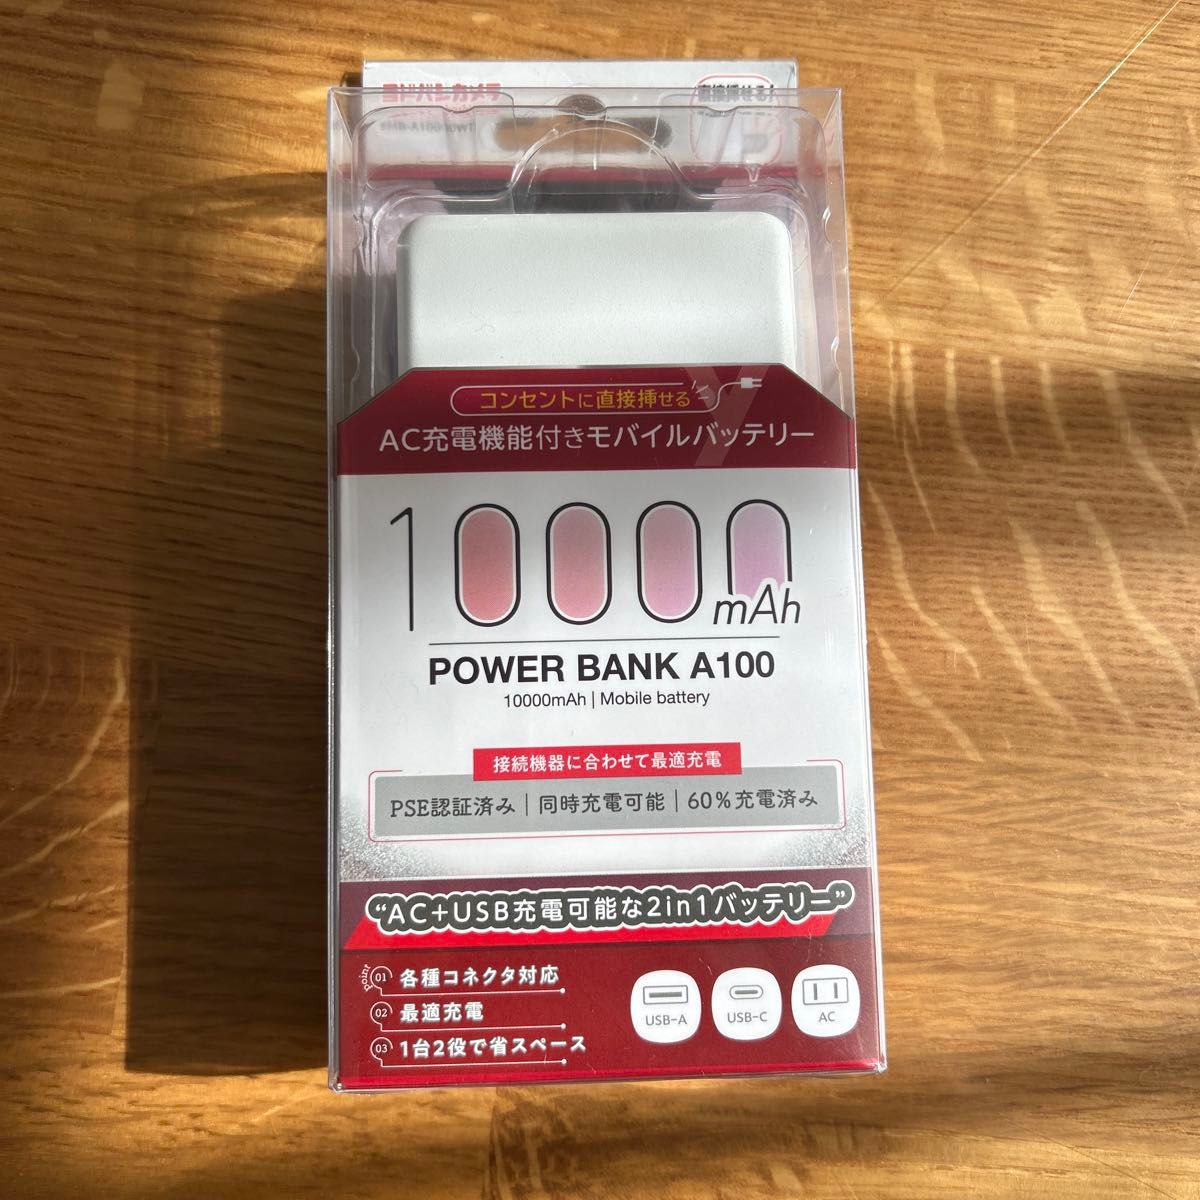 POWER BANK A100 (EMB-A10000WT)　モバイルバッテリー